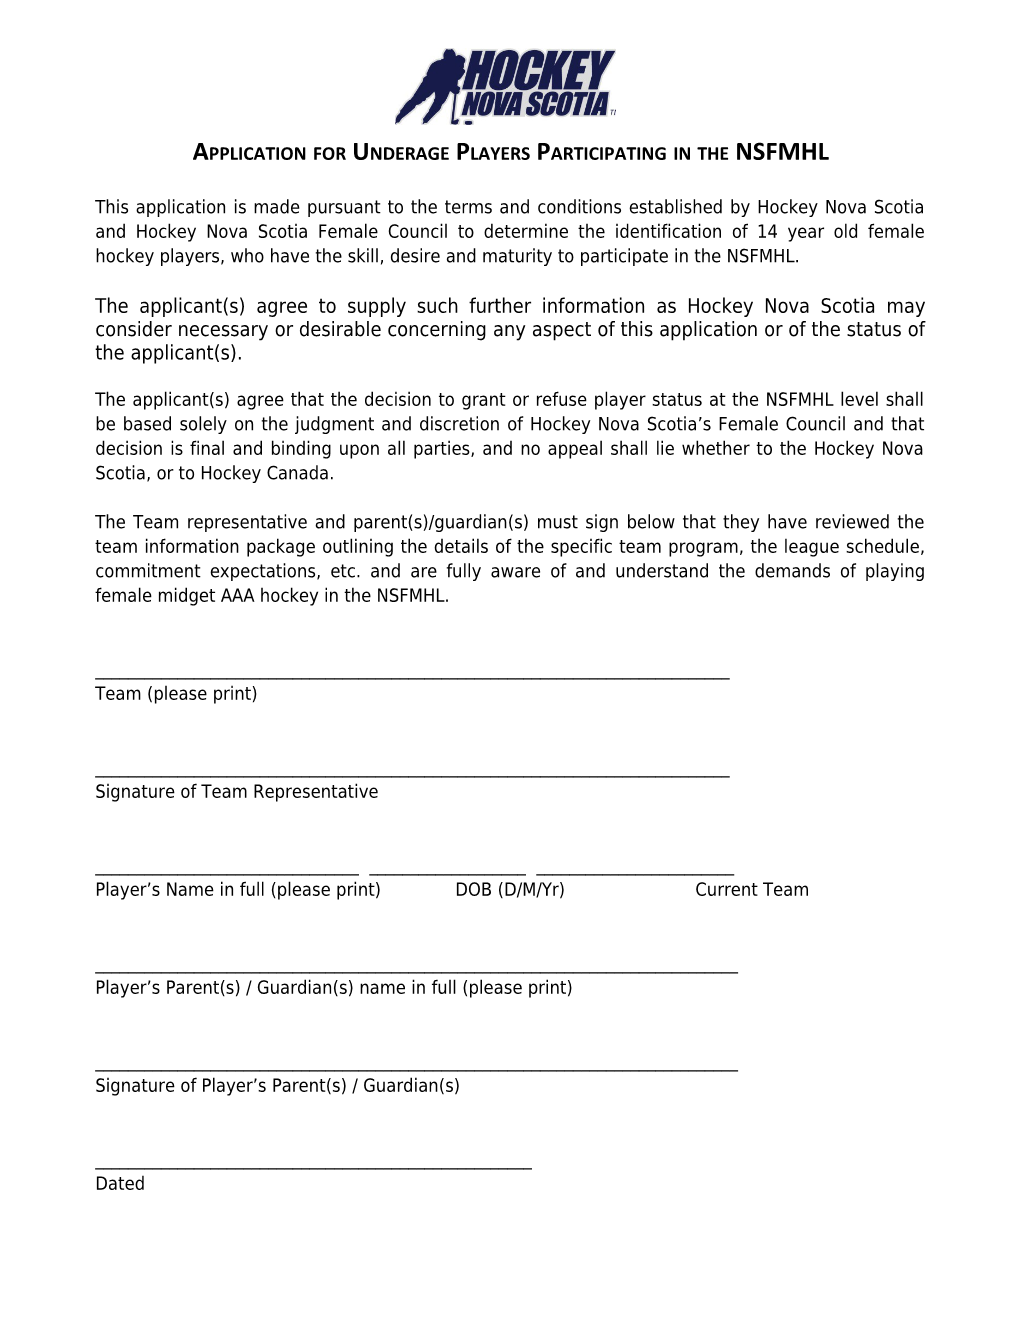 Policy for Underage Players Participating in the NSFMHL